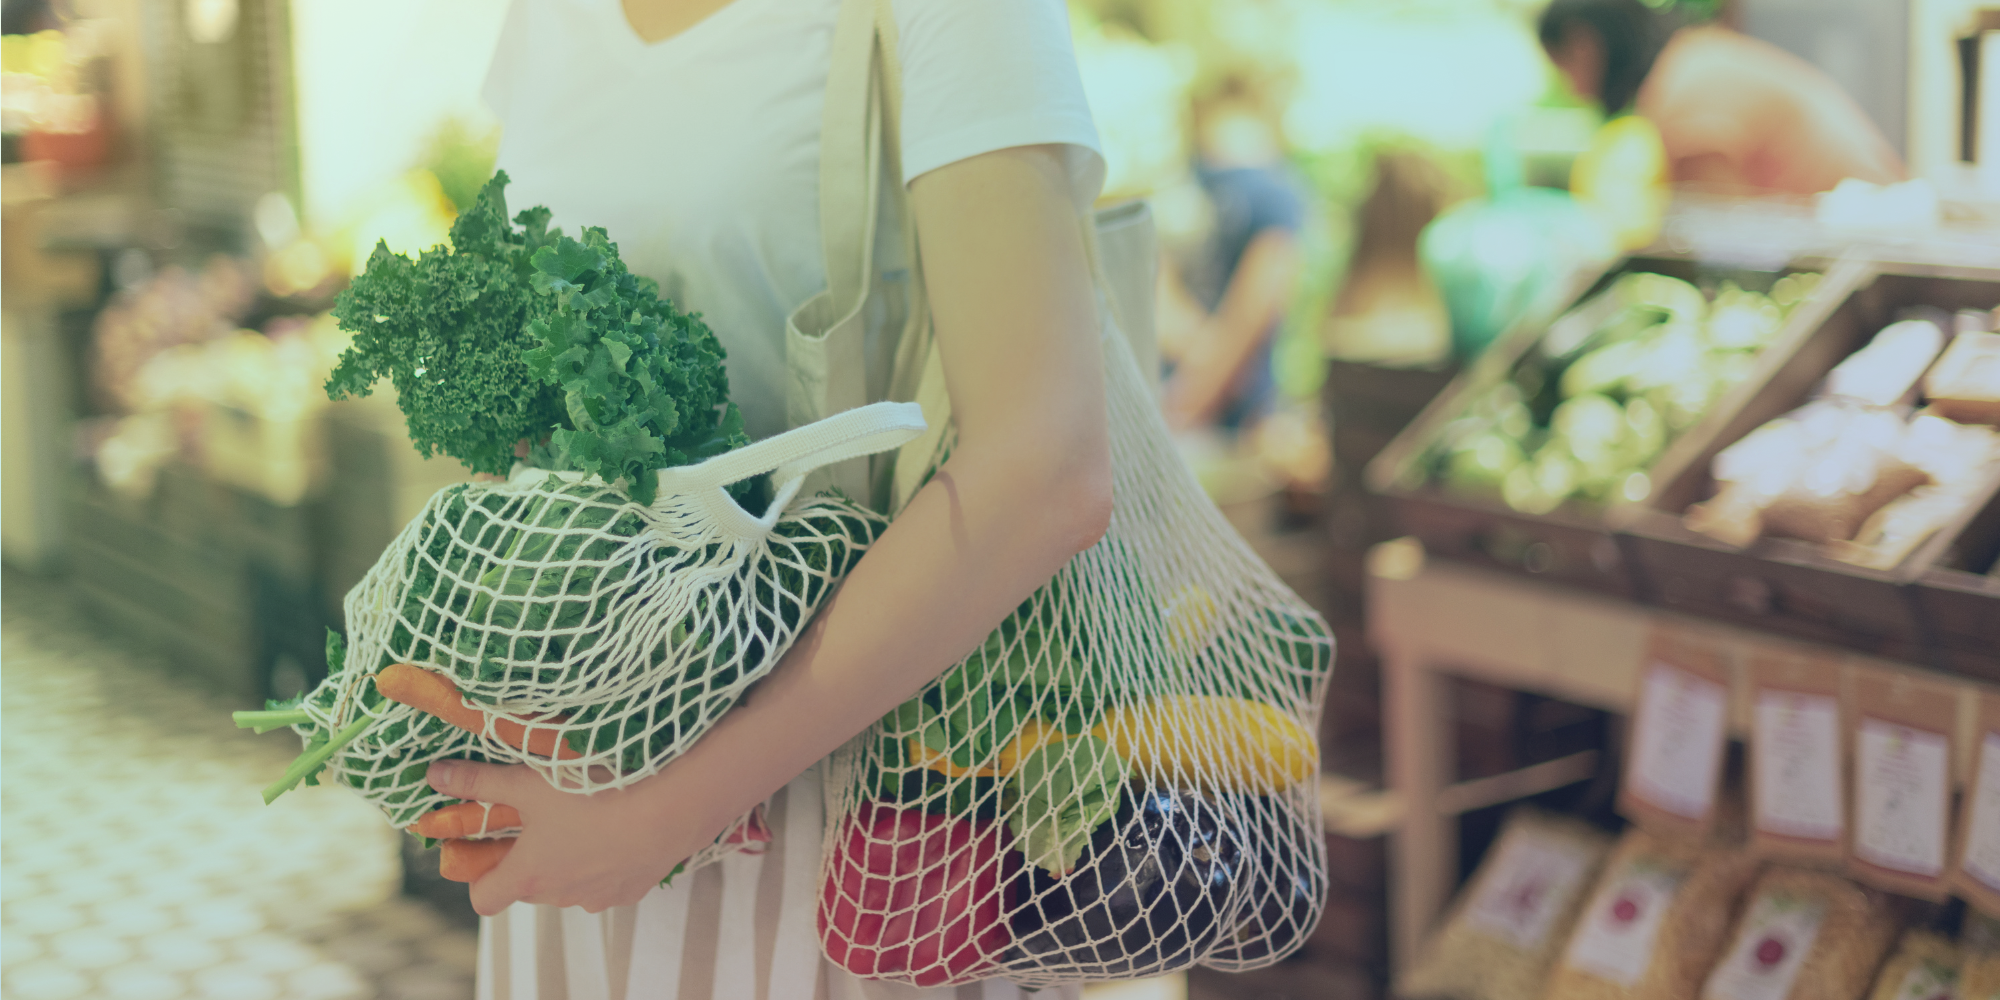 Woman carrying reusable shopping bags filled with vegetables